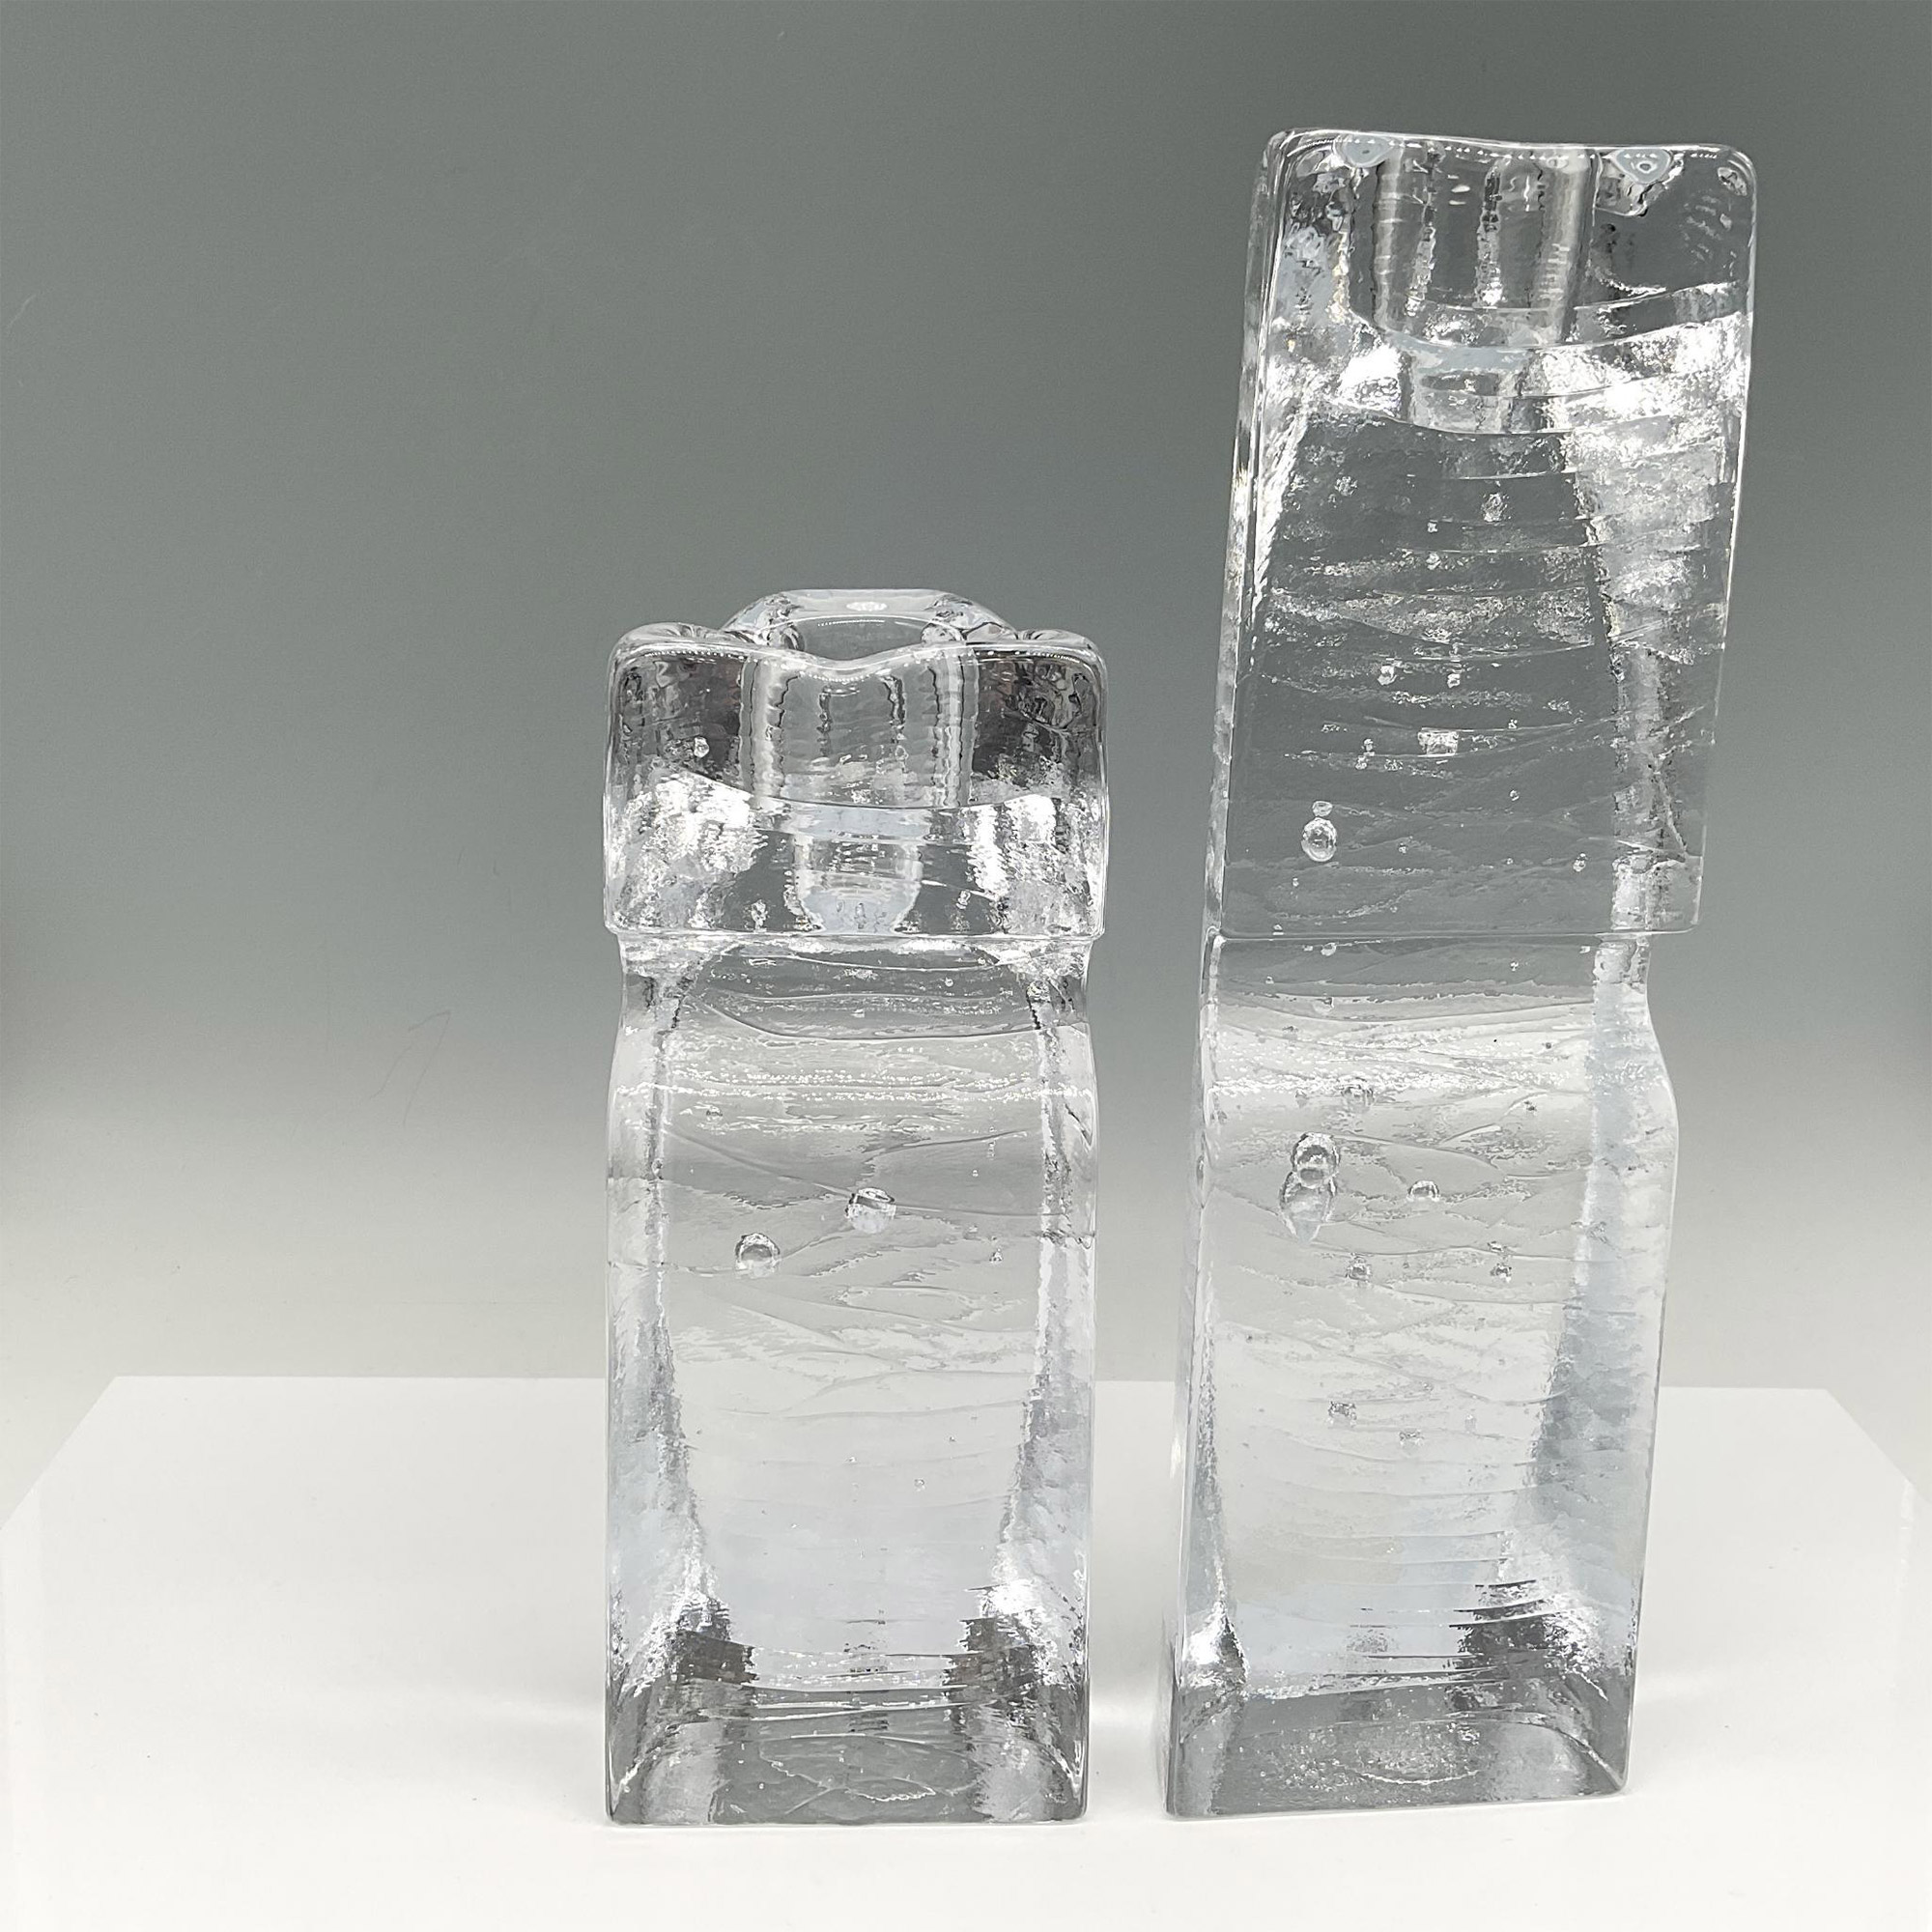 2pc Kosta Boda Crystal Candle Holders, Connect - Image 4 of 5